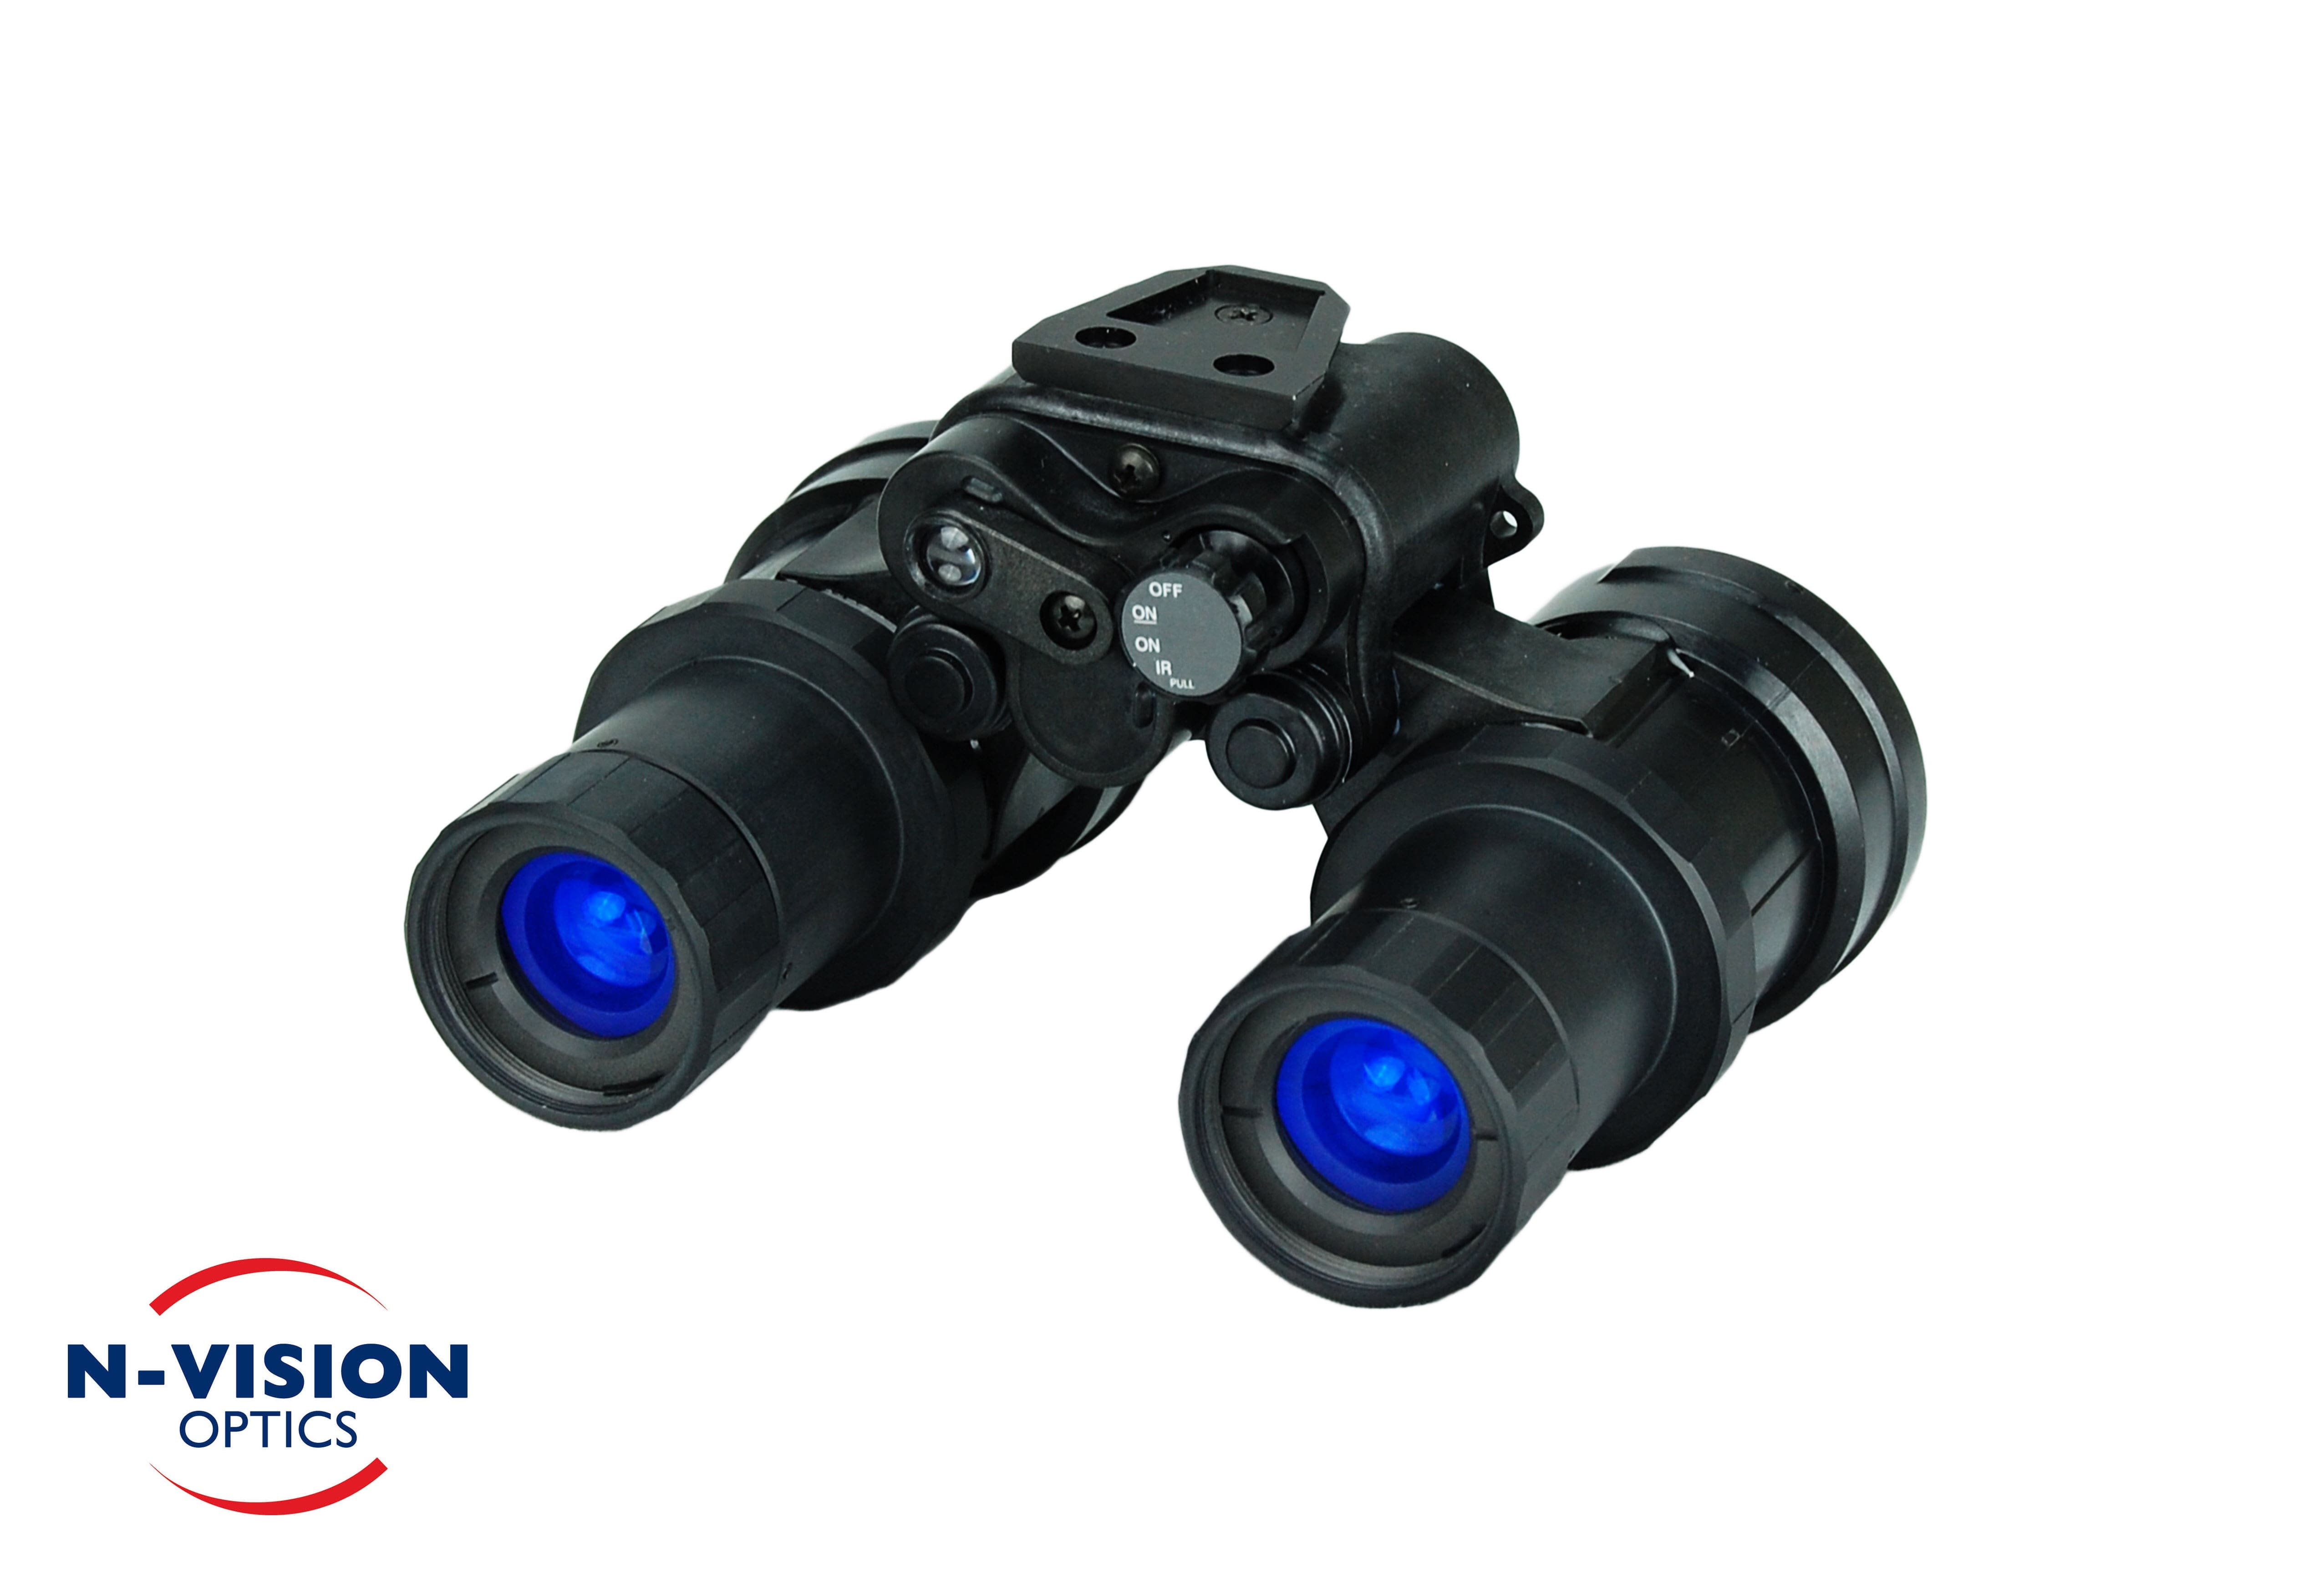 N-Vision Optics Announces New Wide Field Of View Pvs-15 Night Vision  Binocular - Soldier Systems Daily